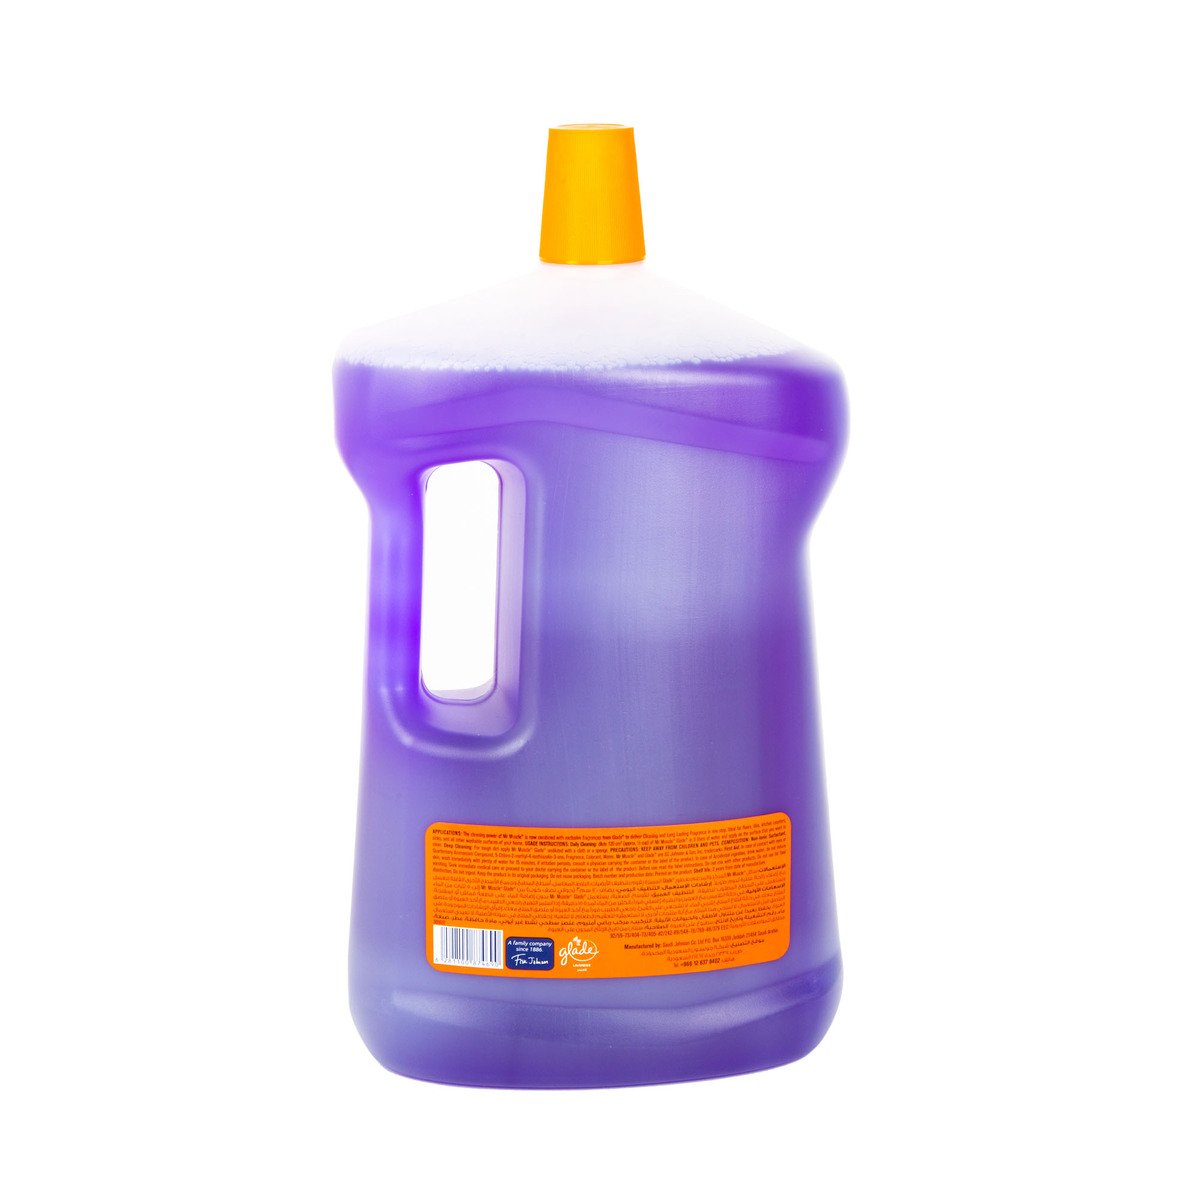 Mr Muscle All Purpose Cleaner Lavender 3Litre